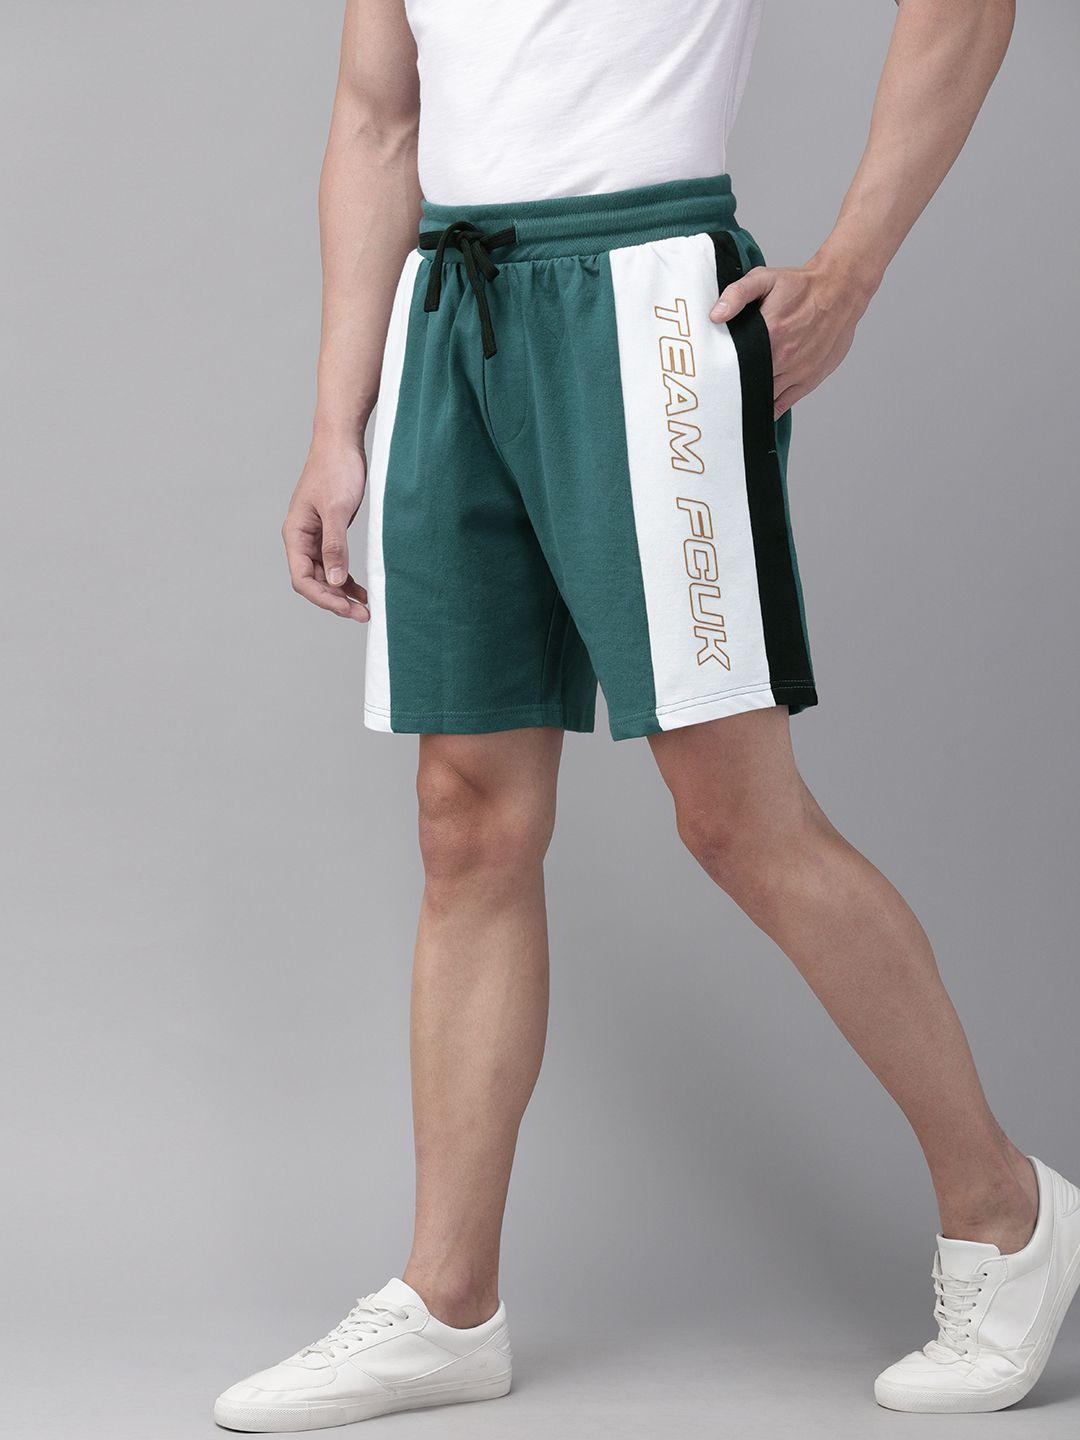 french-connection-men-teal-green-&-white-colourblocked-slim-fit-regular-shorts